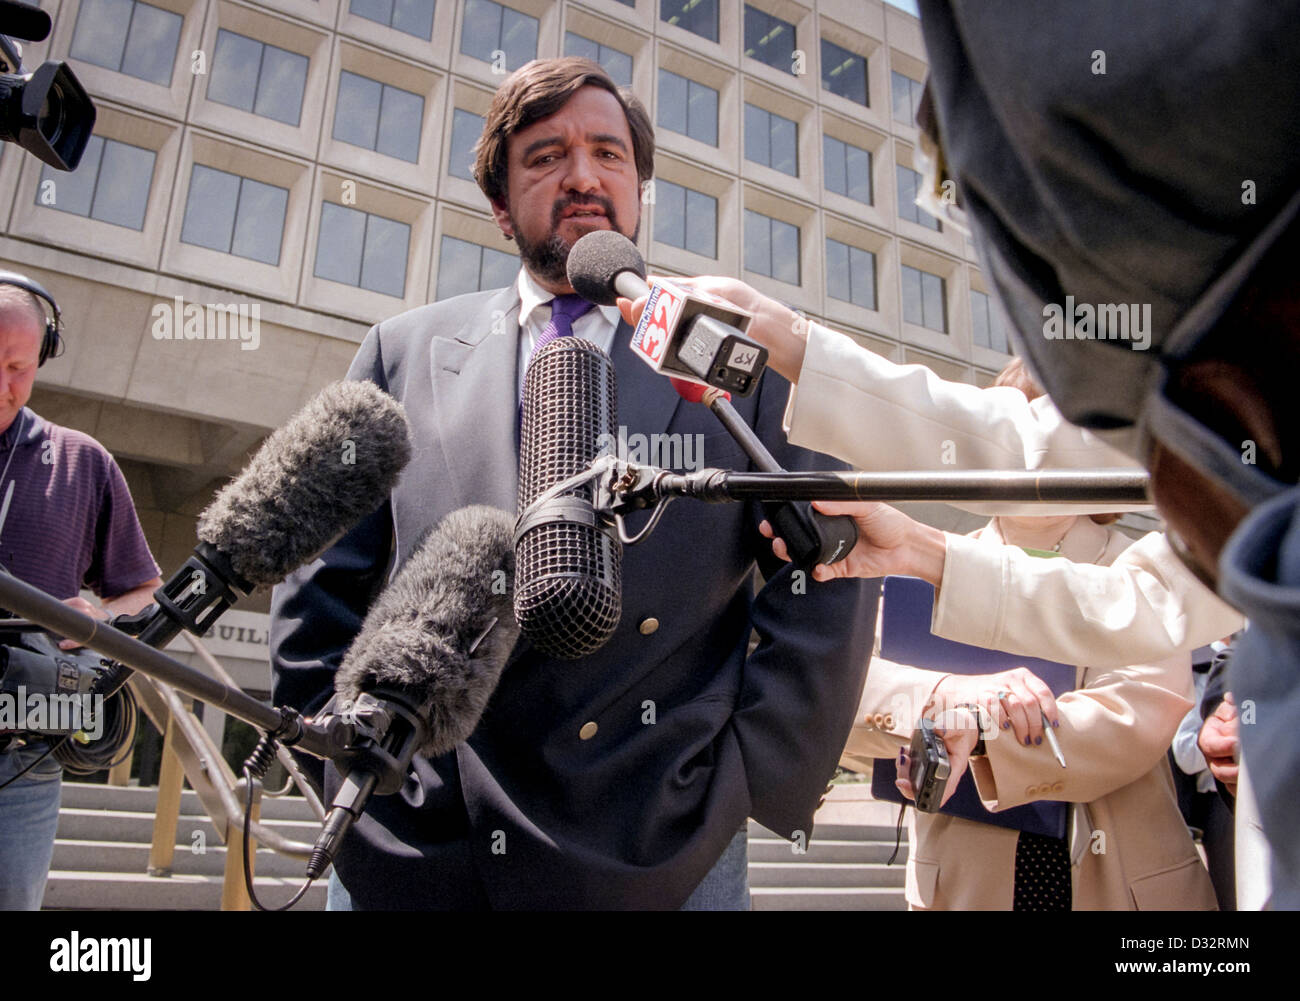 US Secretary of Energy Bill Richardson sporting a new beard speaks to the press about allegations concerning the nuclear weapons plant in Paducah, KY August 10, 1999 in Washington, DC. Stock Photo